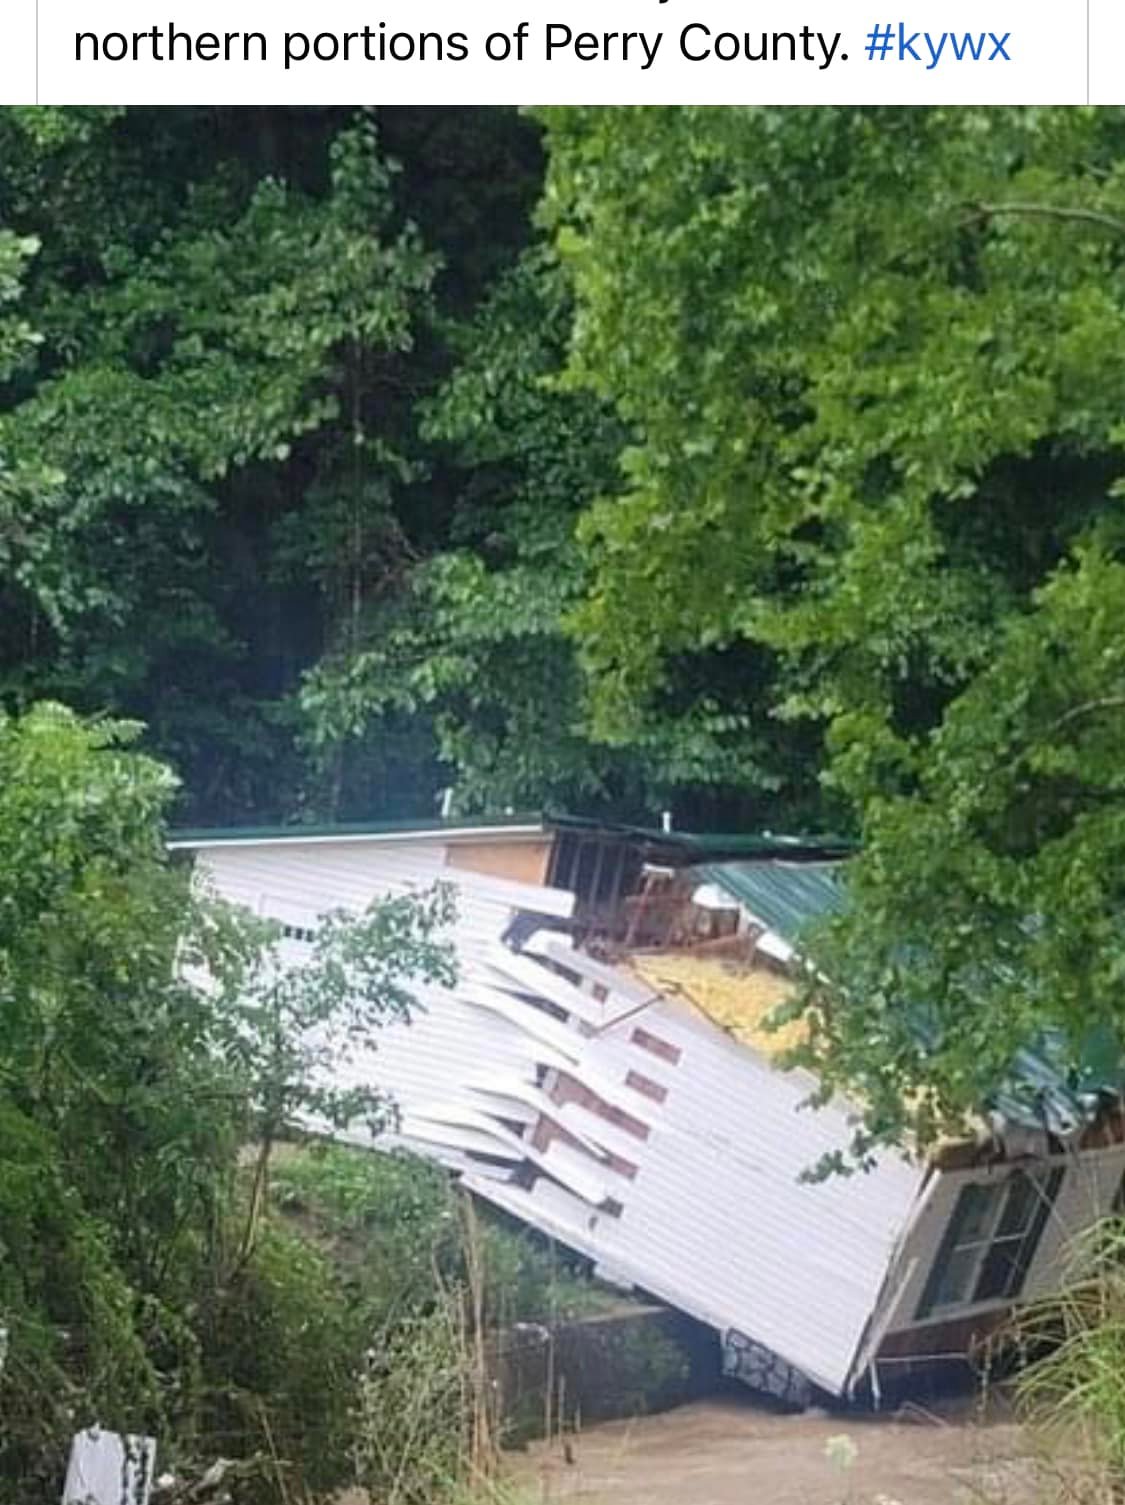 A house in Chavies, KY slid off its foundation and broke in half on the side of a bluff